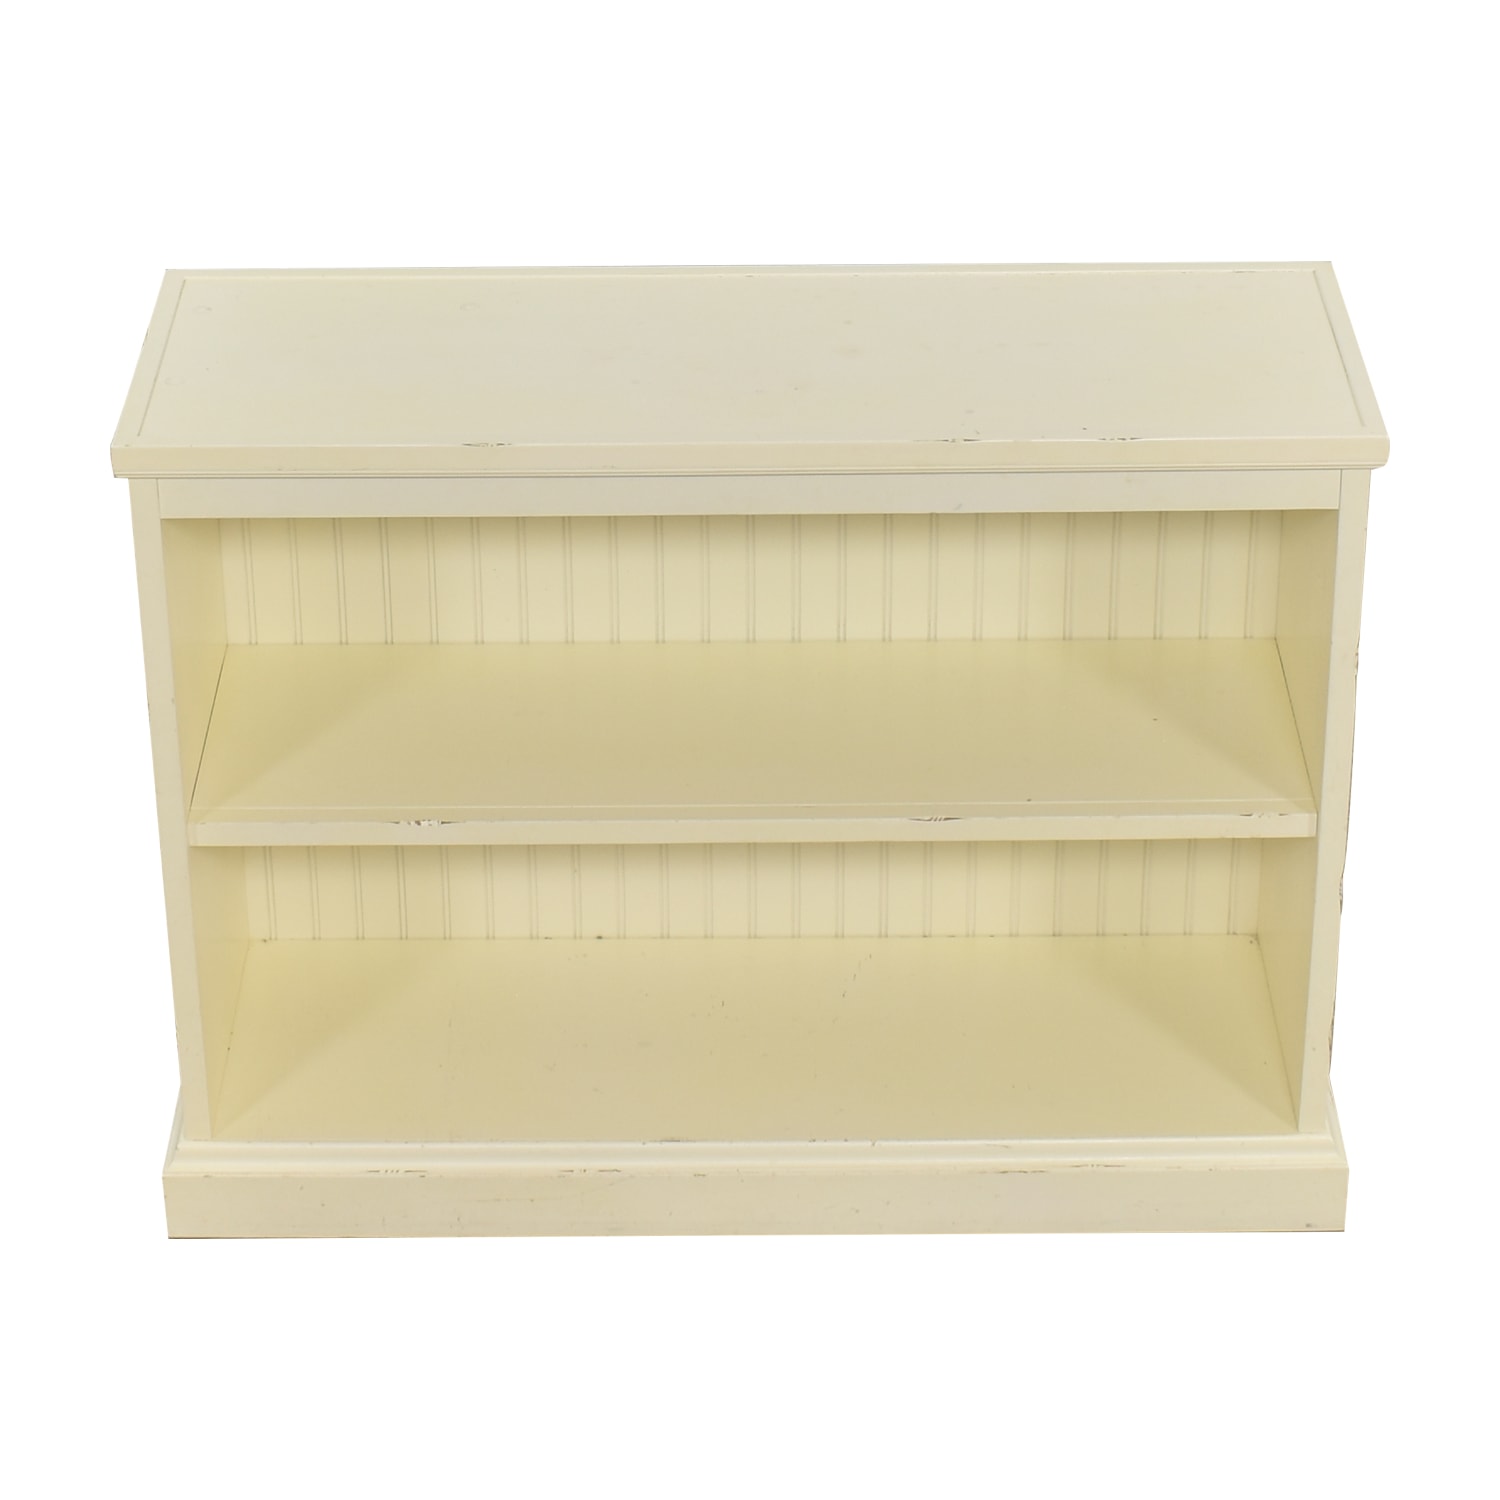 https://res.cloudinary.com/dkqtxtobb/image/upload/f_auto,q_auto:best,w_1500/product-assets/380528/pottery-barn-kids/storage/bookcases-shelving/classic-2-shelf-bookcase-used.jpeg